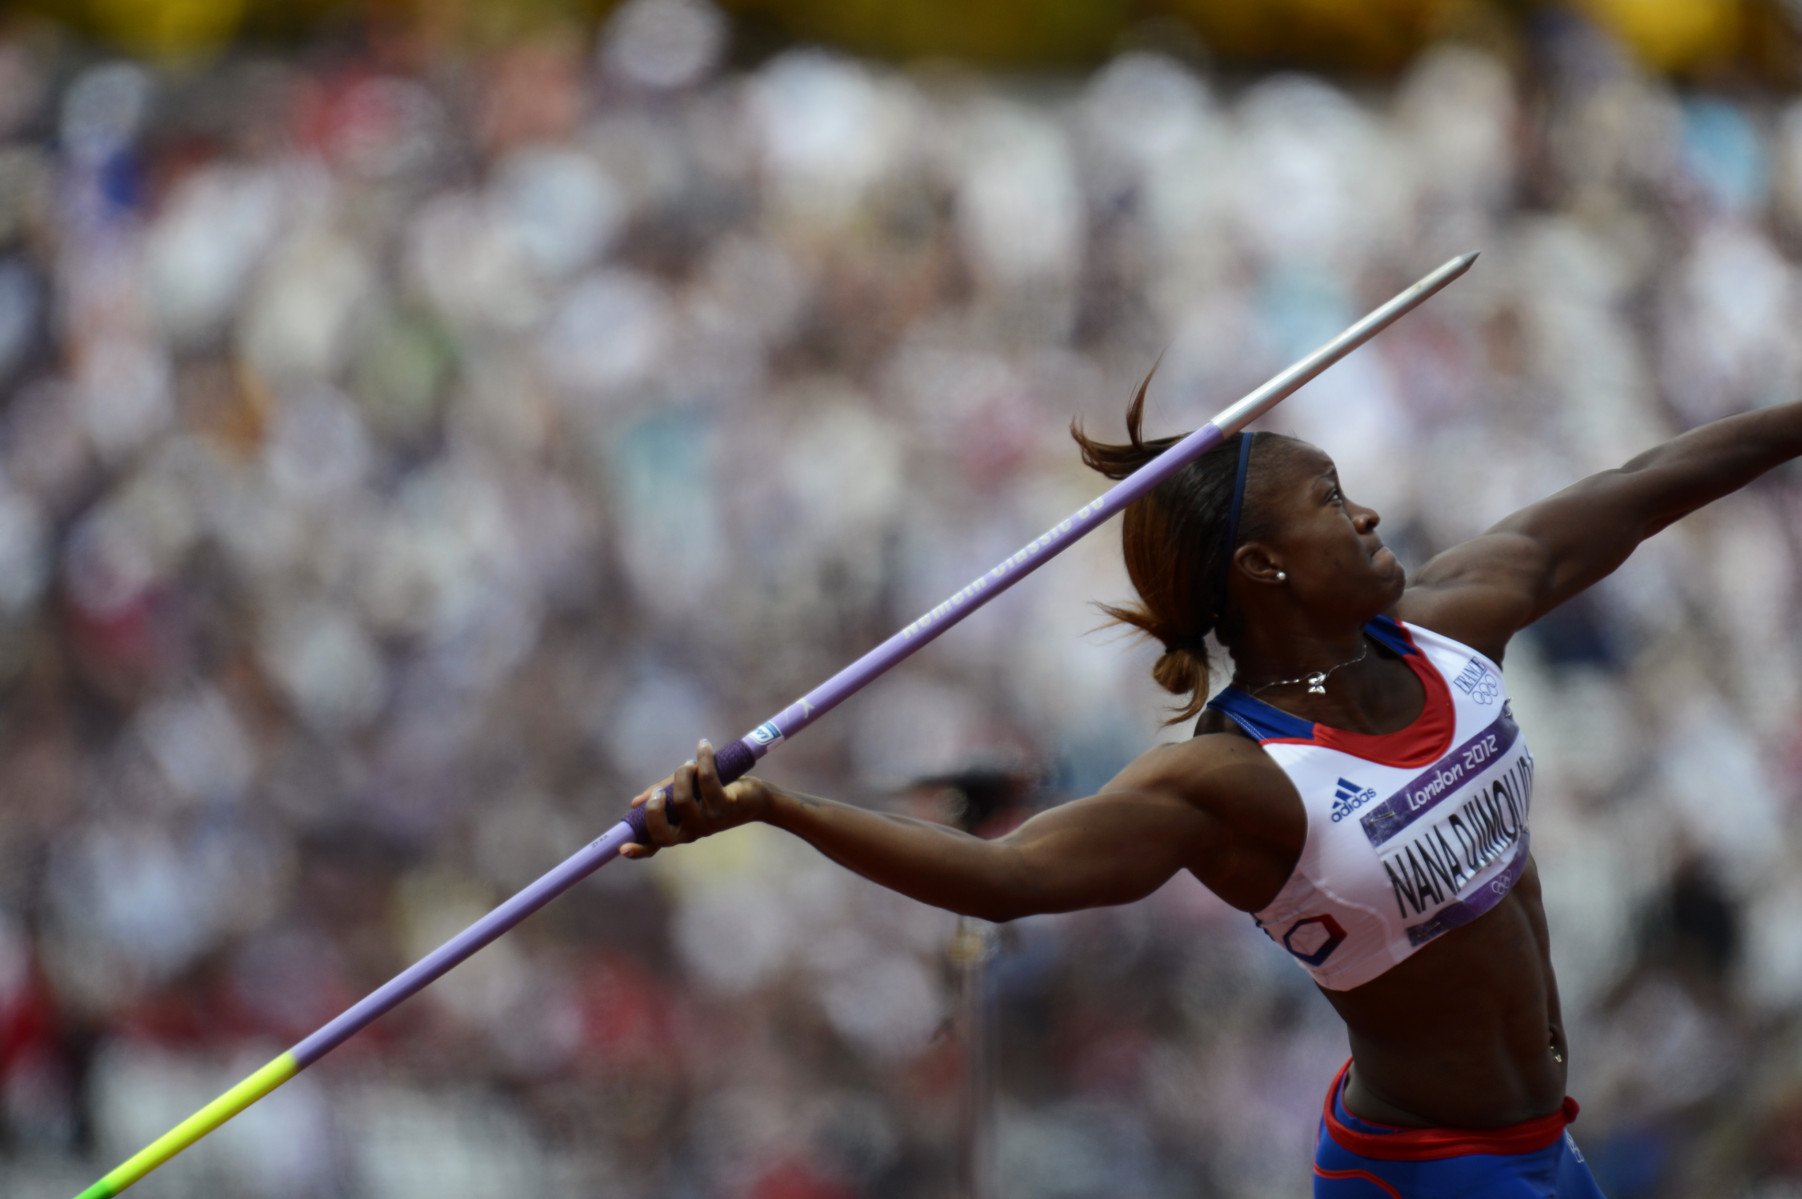 Antoinette Nana Djimou Ida of France throwing the javelin during the Heptathlon competition at the London Olympics.  : Olympics : Photography by Adam Stoltman: Sports Photography, The Arts, Portraiture, Travel, Photojournalism and Fine Art in New York